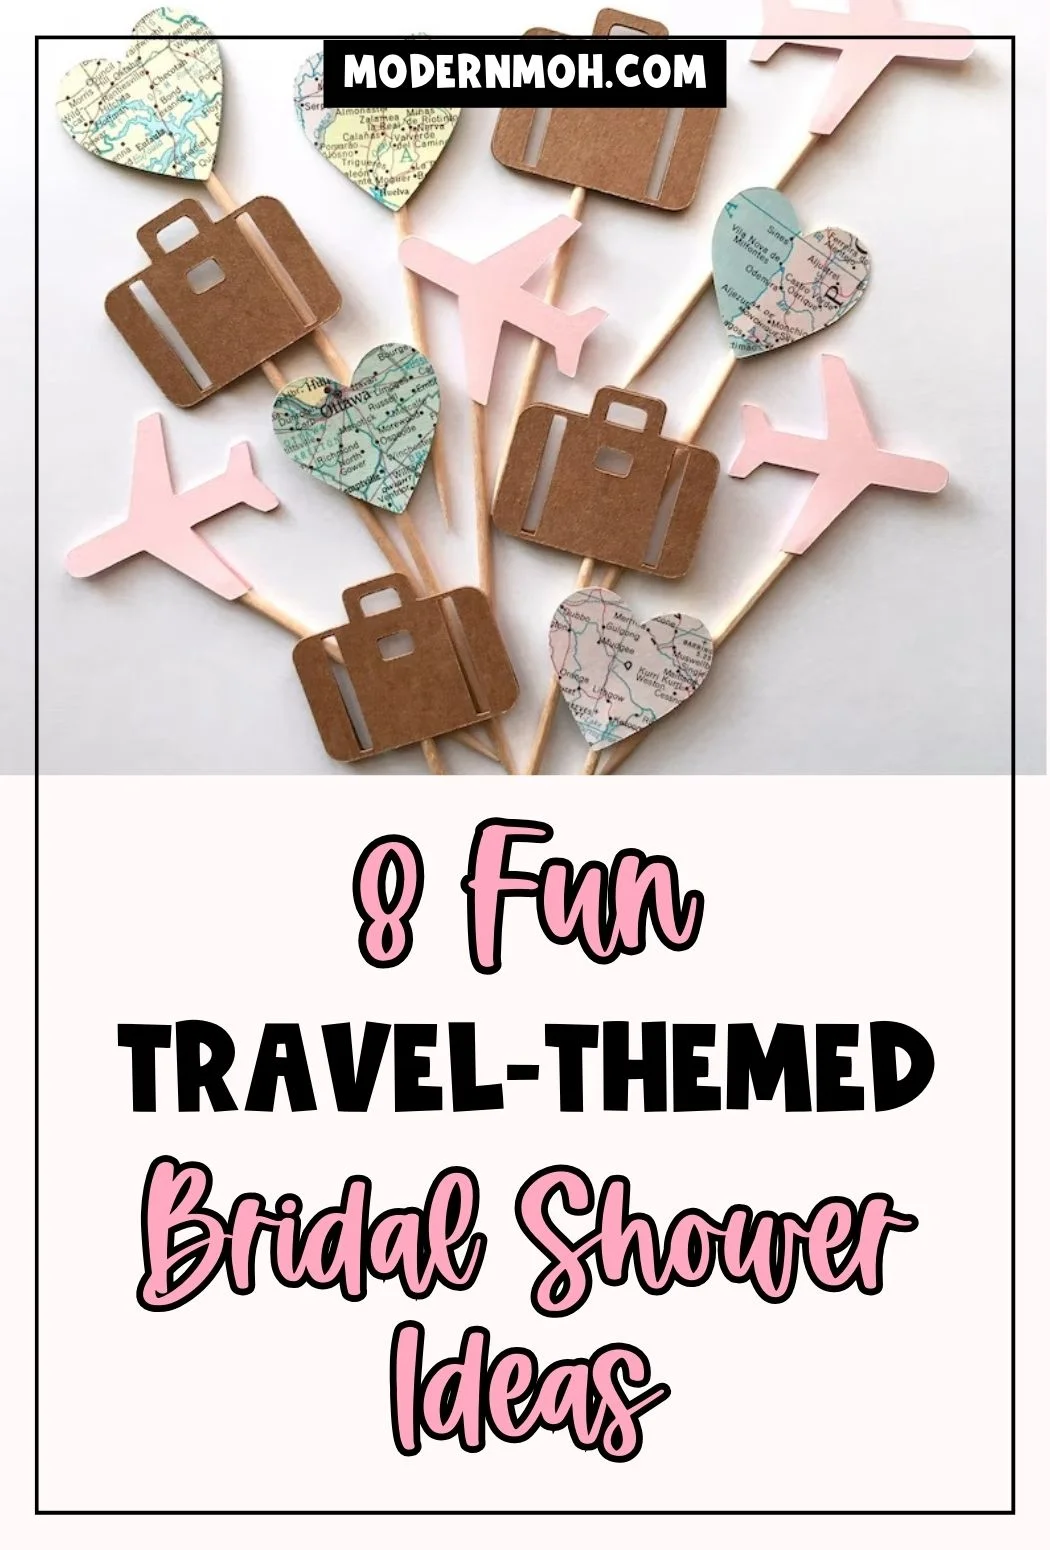 “From Miss to Mrs”: 8 Fun Travel-Themed Bridal Shower Ideas